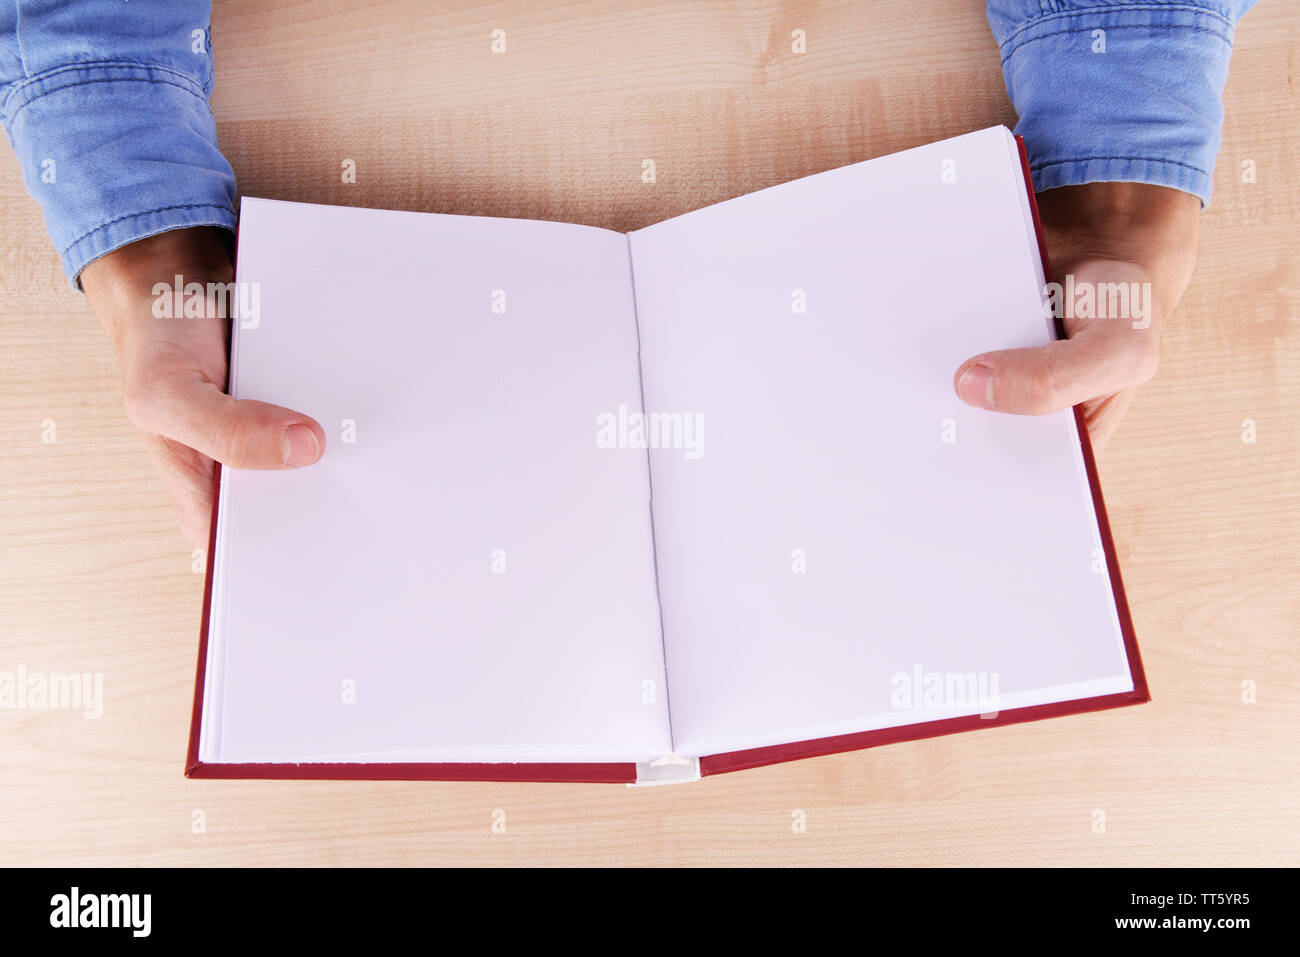 Hands holding an open empty book background Stock Photo by